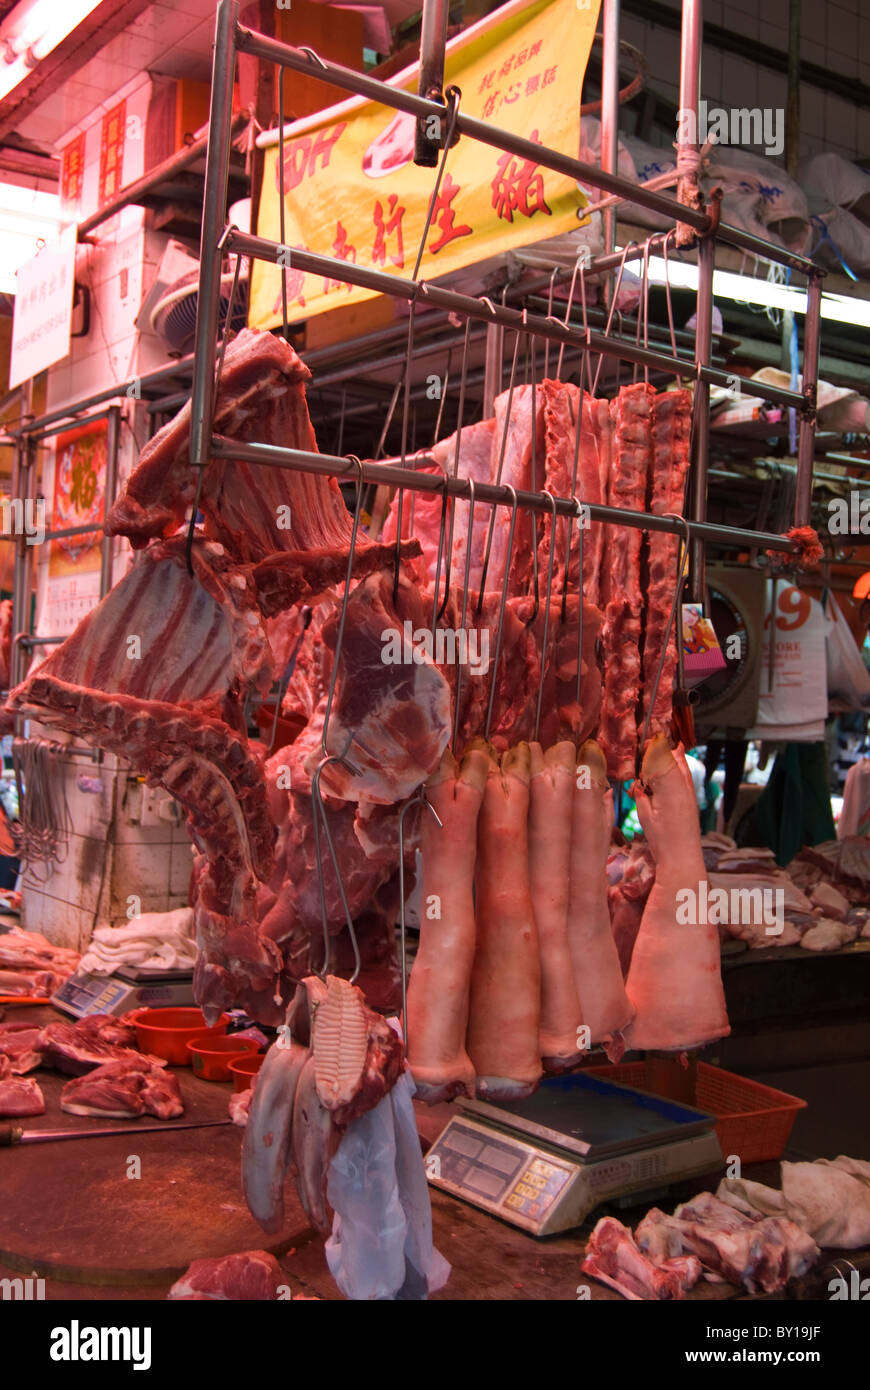 Fresh meat hanging in front of a shop in a market, Hong Kong Stock Photo